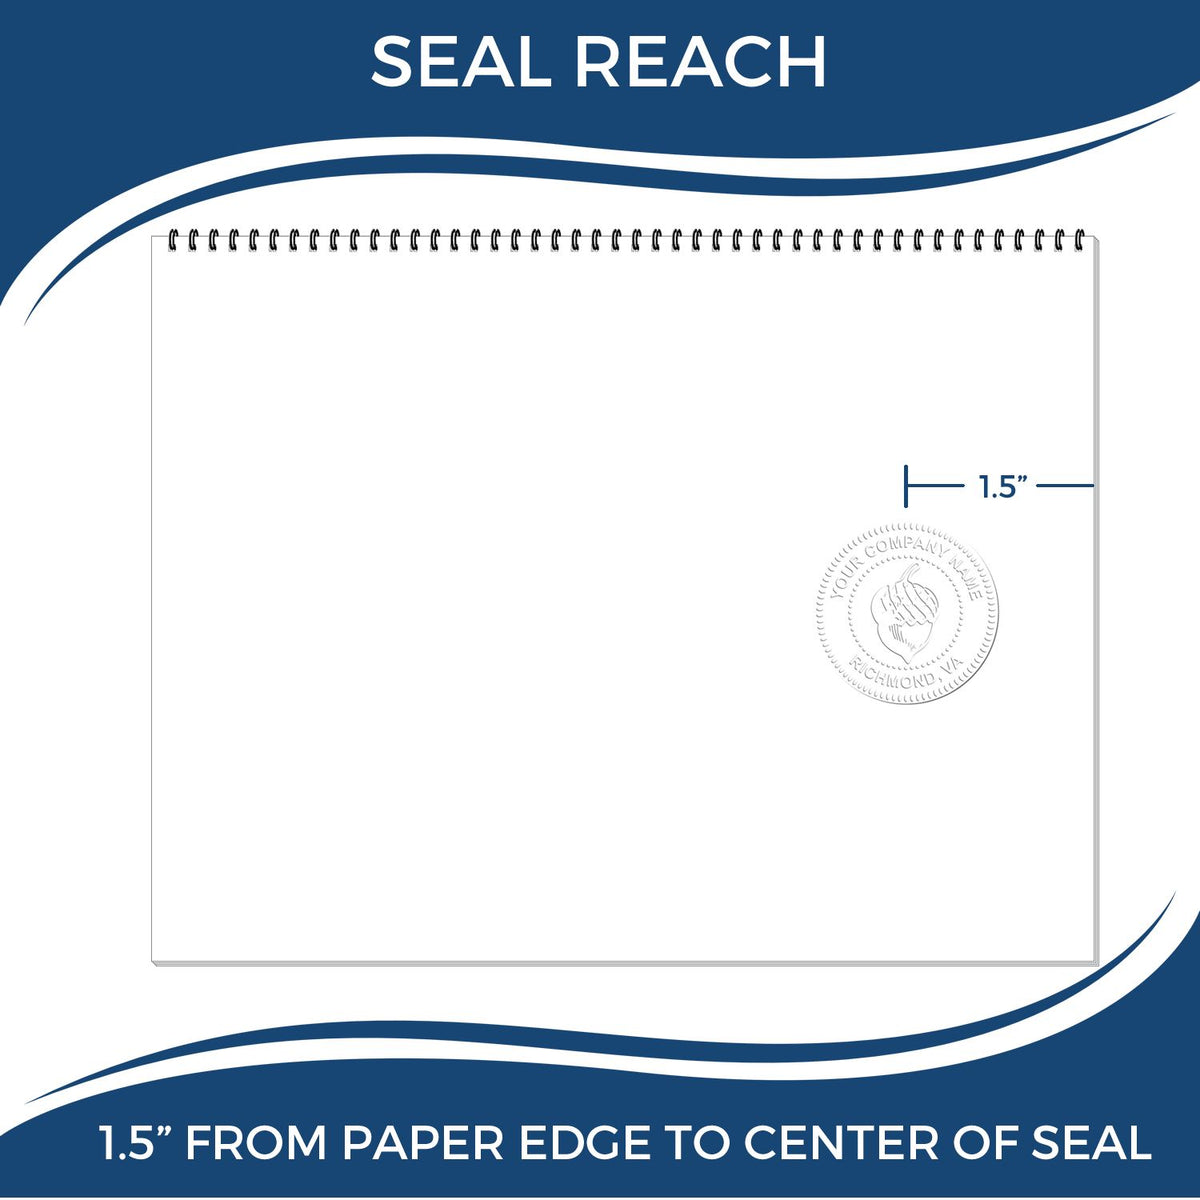 An infographic showing the seal reach which is represented by a ruler and a miniature seal image of the Hybrid Oklahoma Land Surveyor Seal